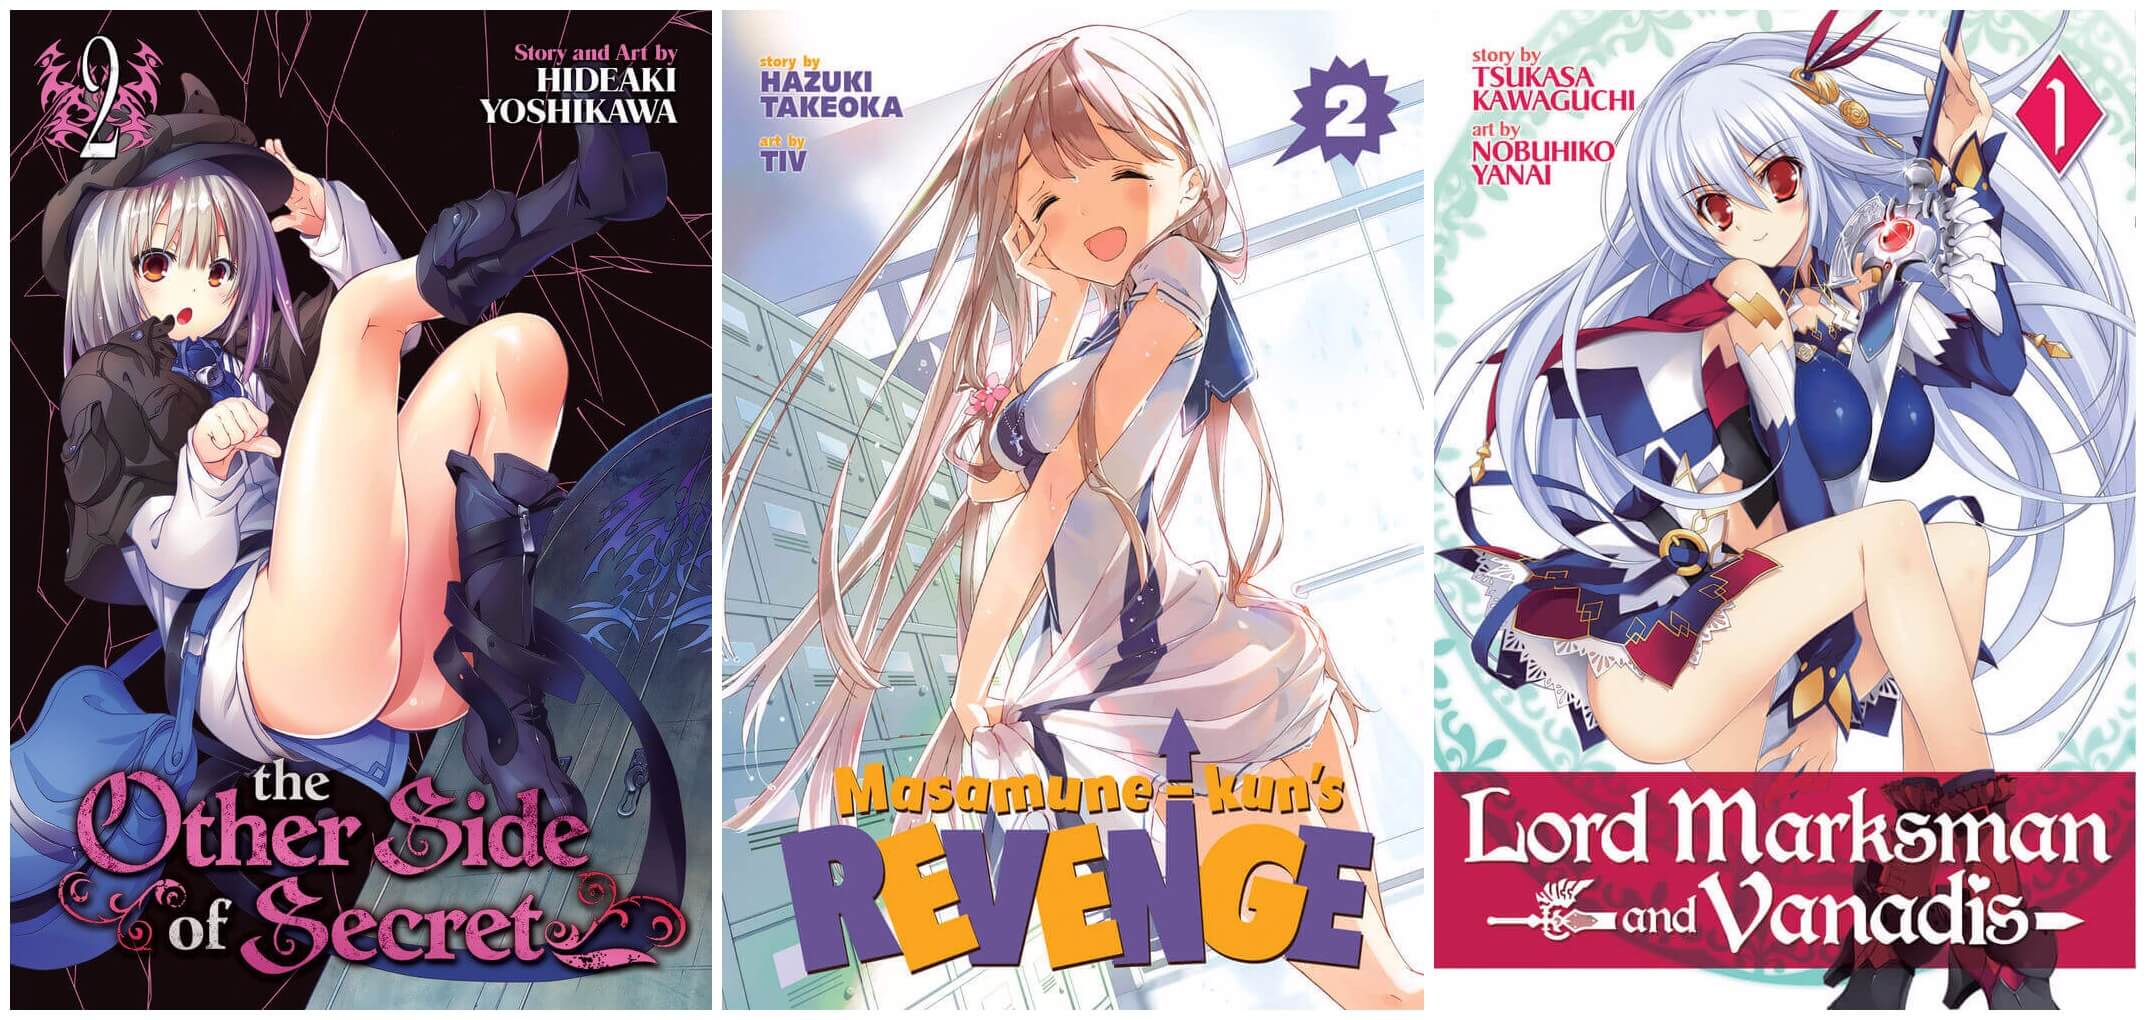 September 2016 Manga Releases Covers for The Other Side of Secret, Masamune-kun's Revenge, and Lord Marksman and Vanadis.